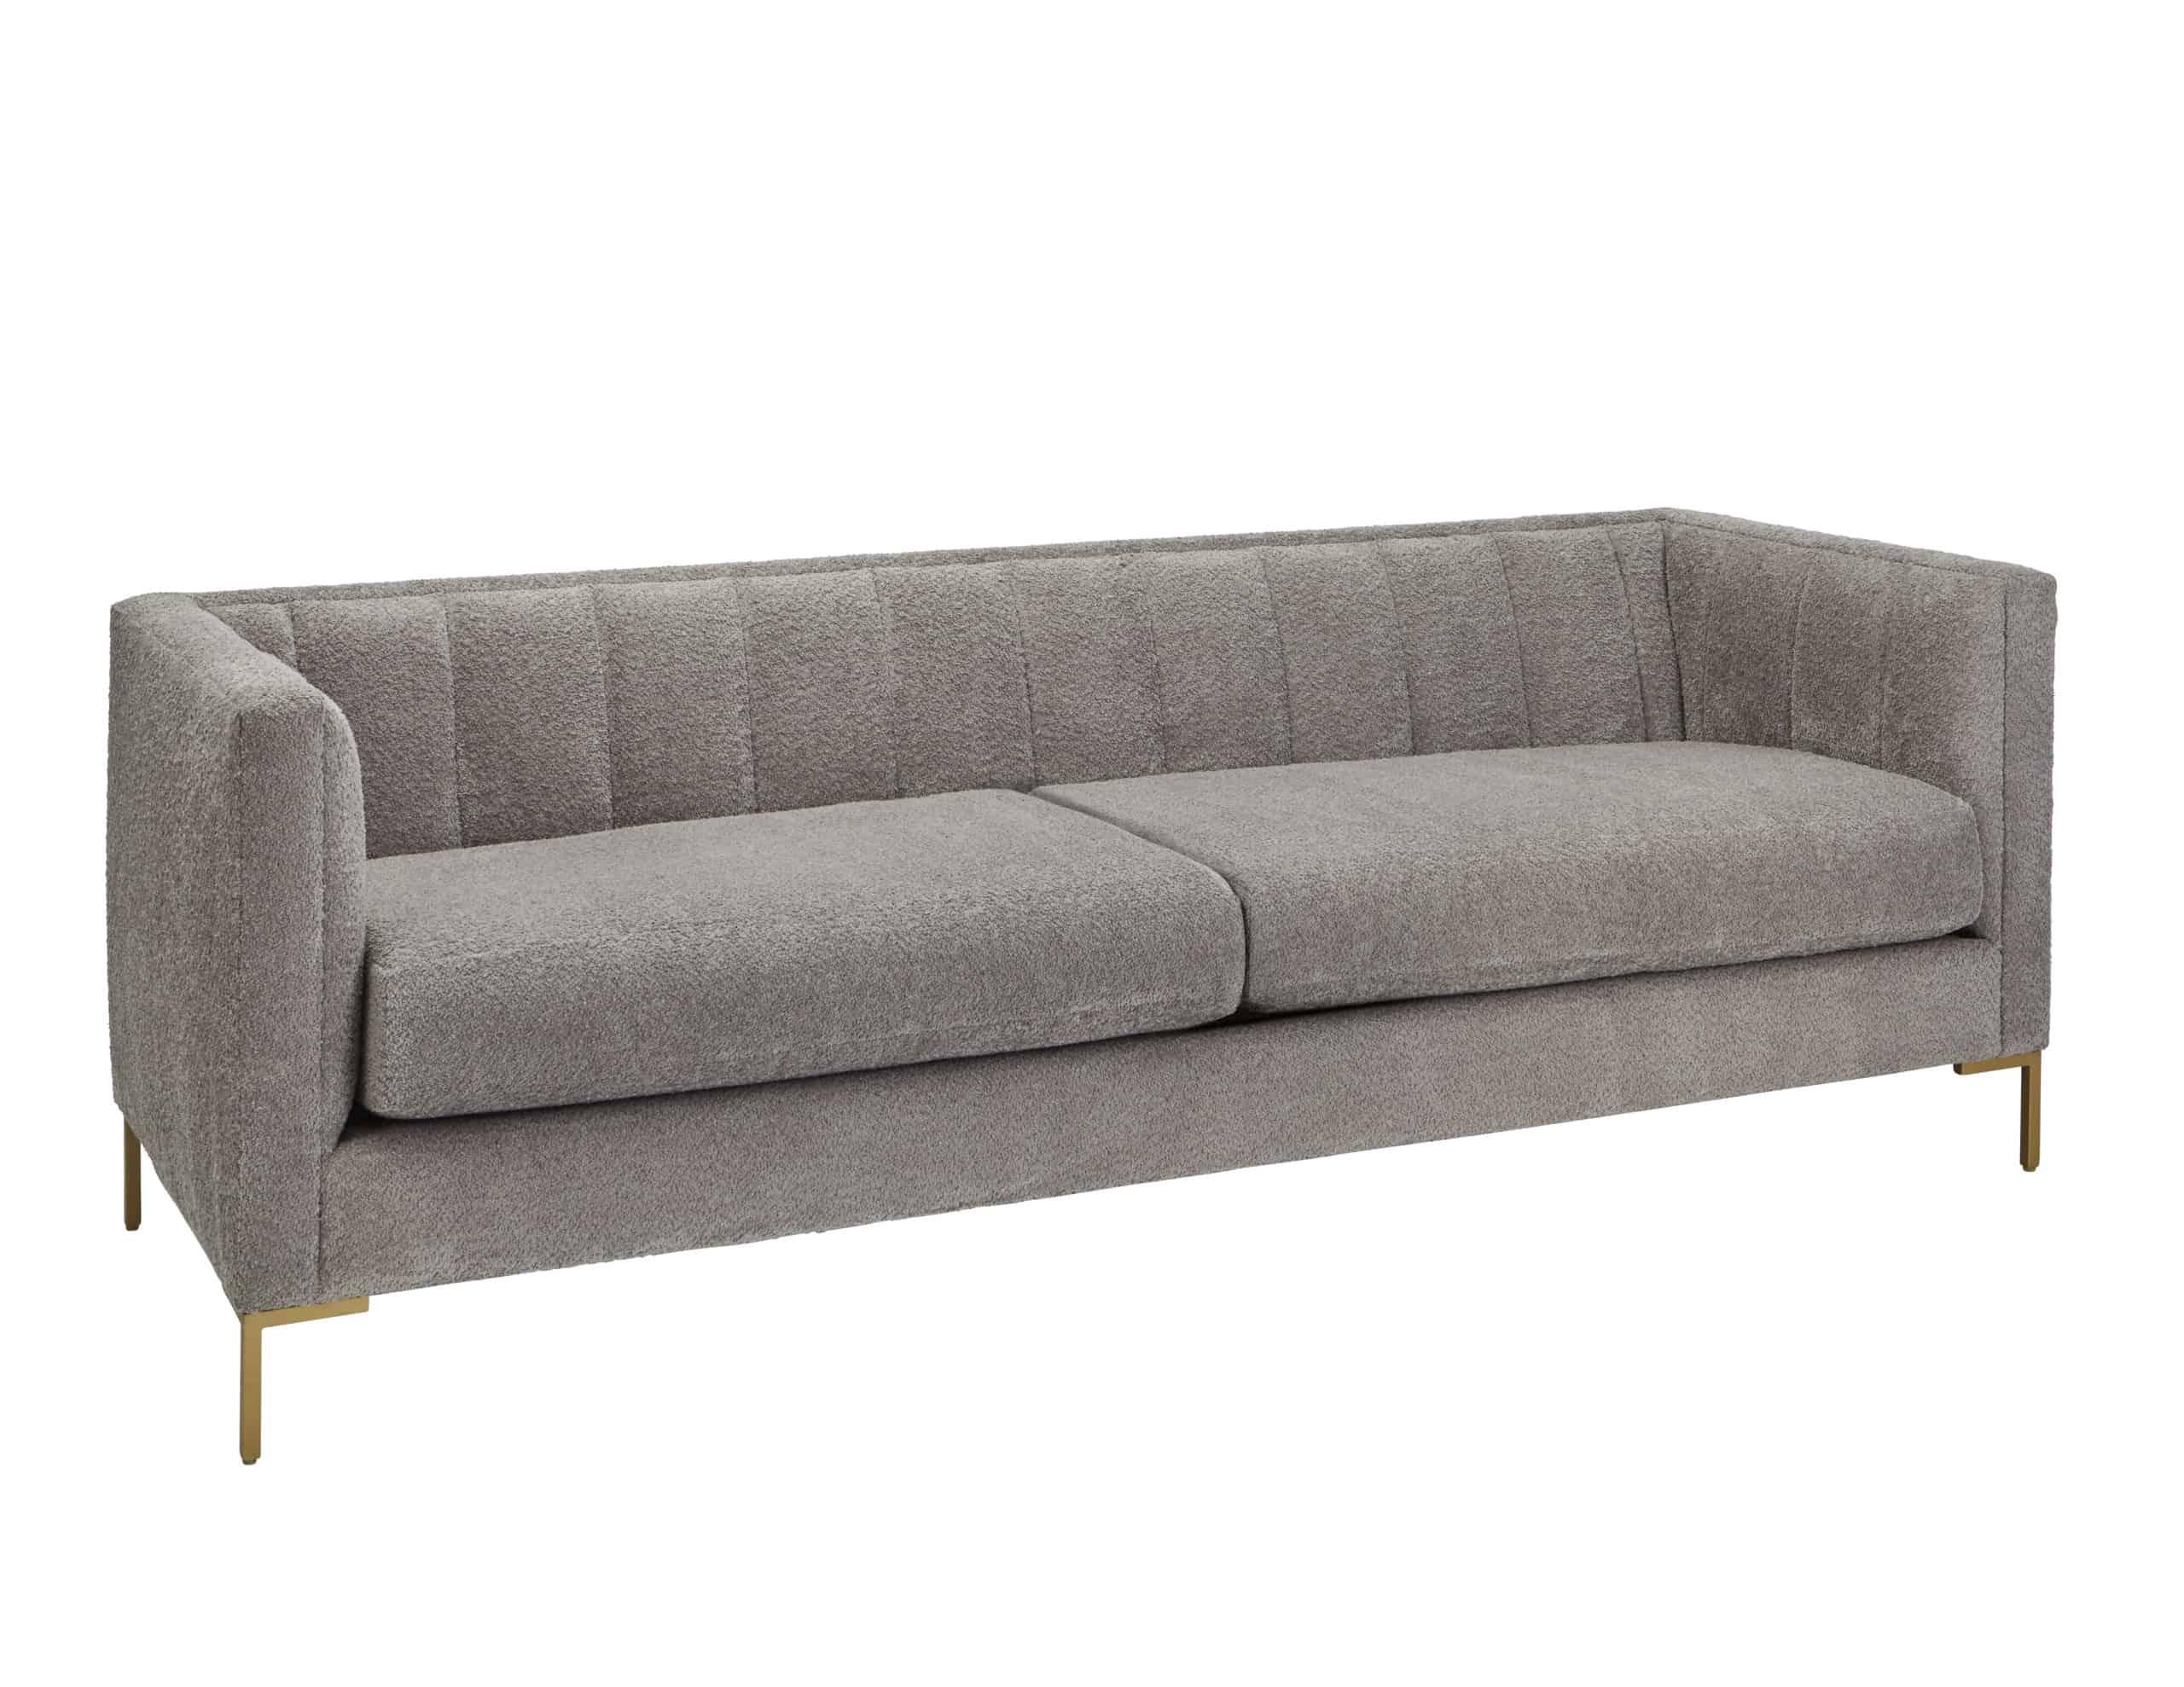 Contemporary, Modern Sofa 772501-5026F3 772501-5026F3 in Pewter 